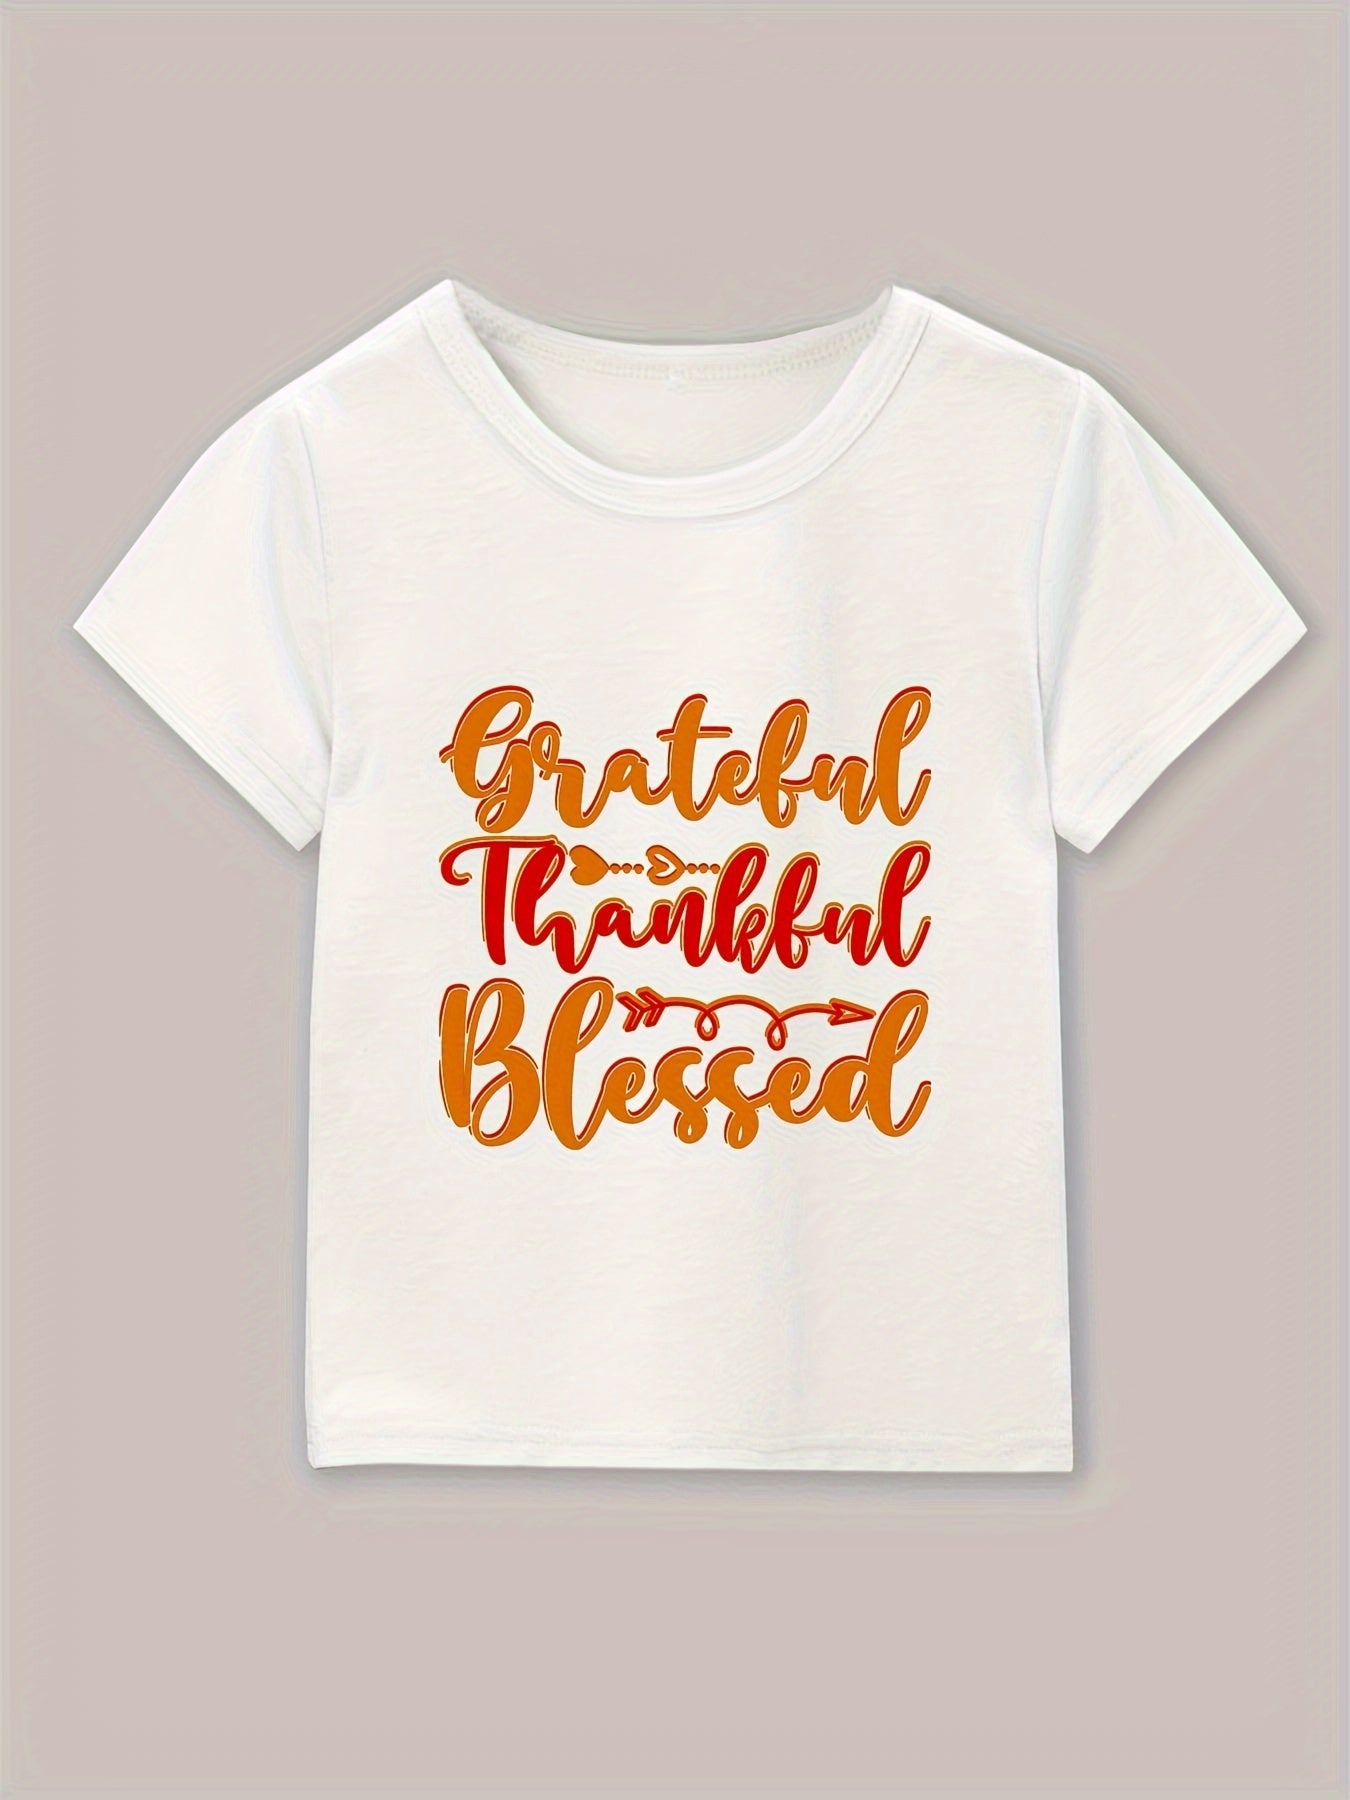 GRATEFUL THANKFUL BLESSED (thanksgiving themed) Youth Christian T-shirt claimedbygoddesigns